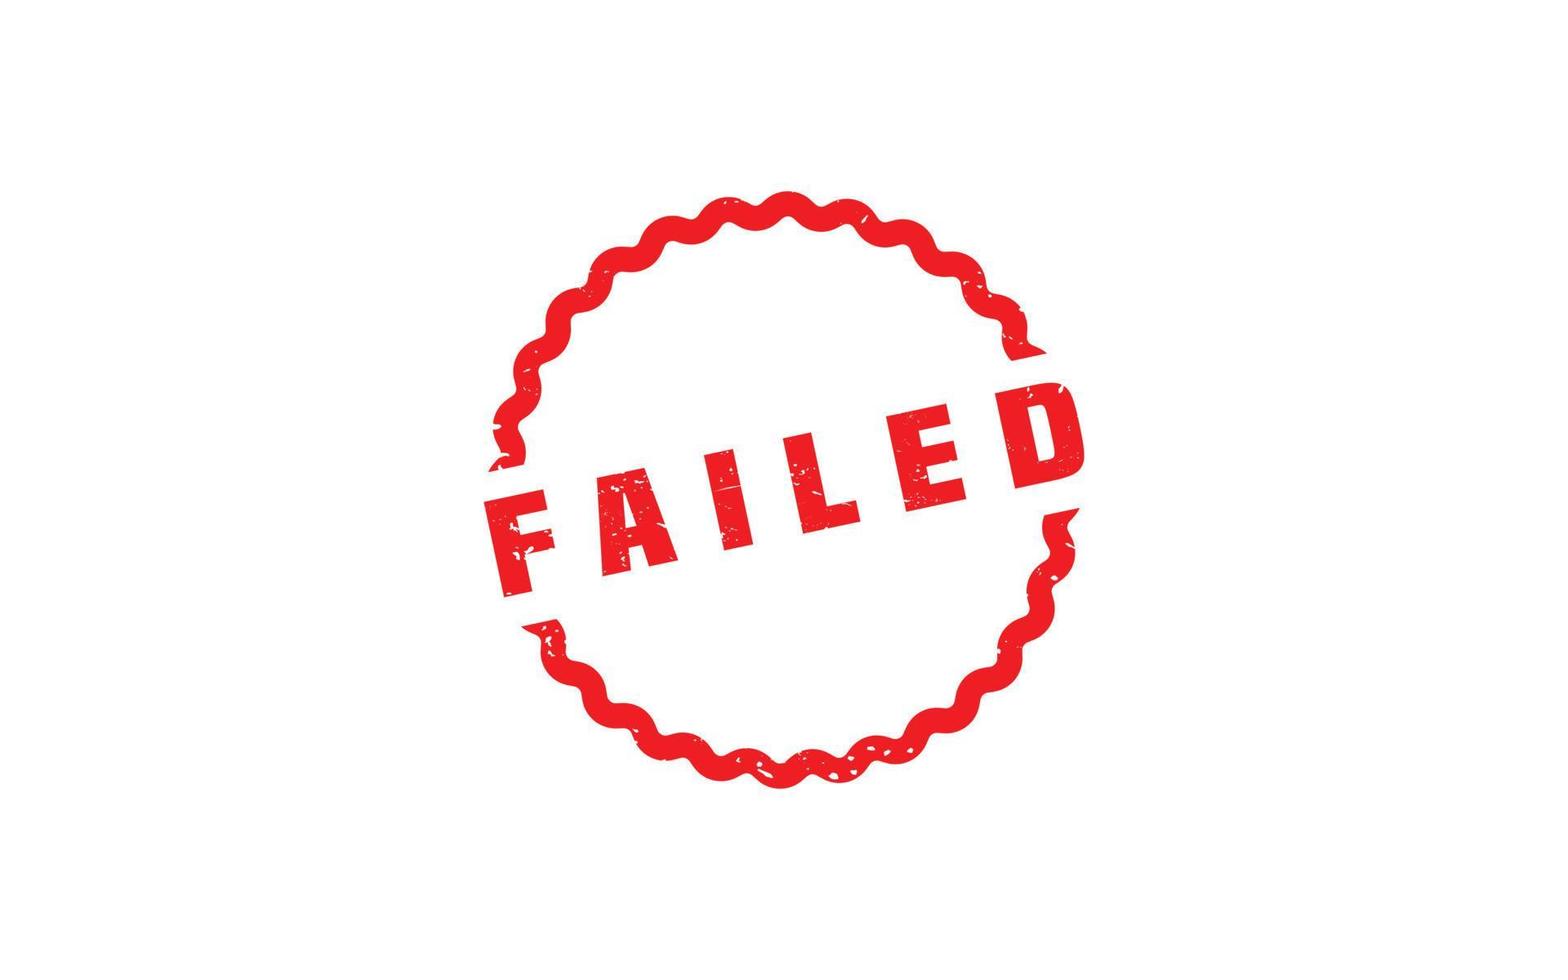 FAILED rubber stamp with grunge style on white background vector